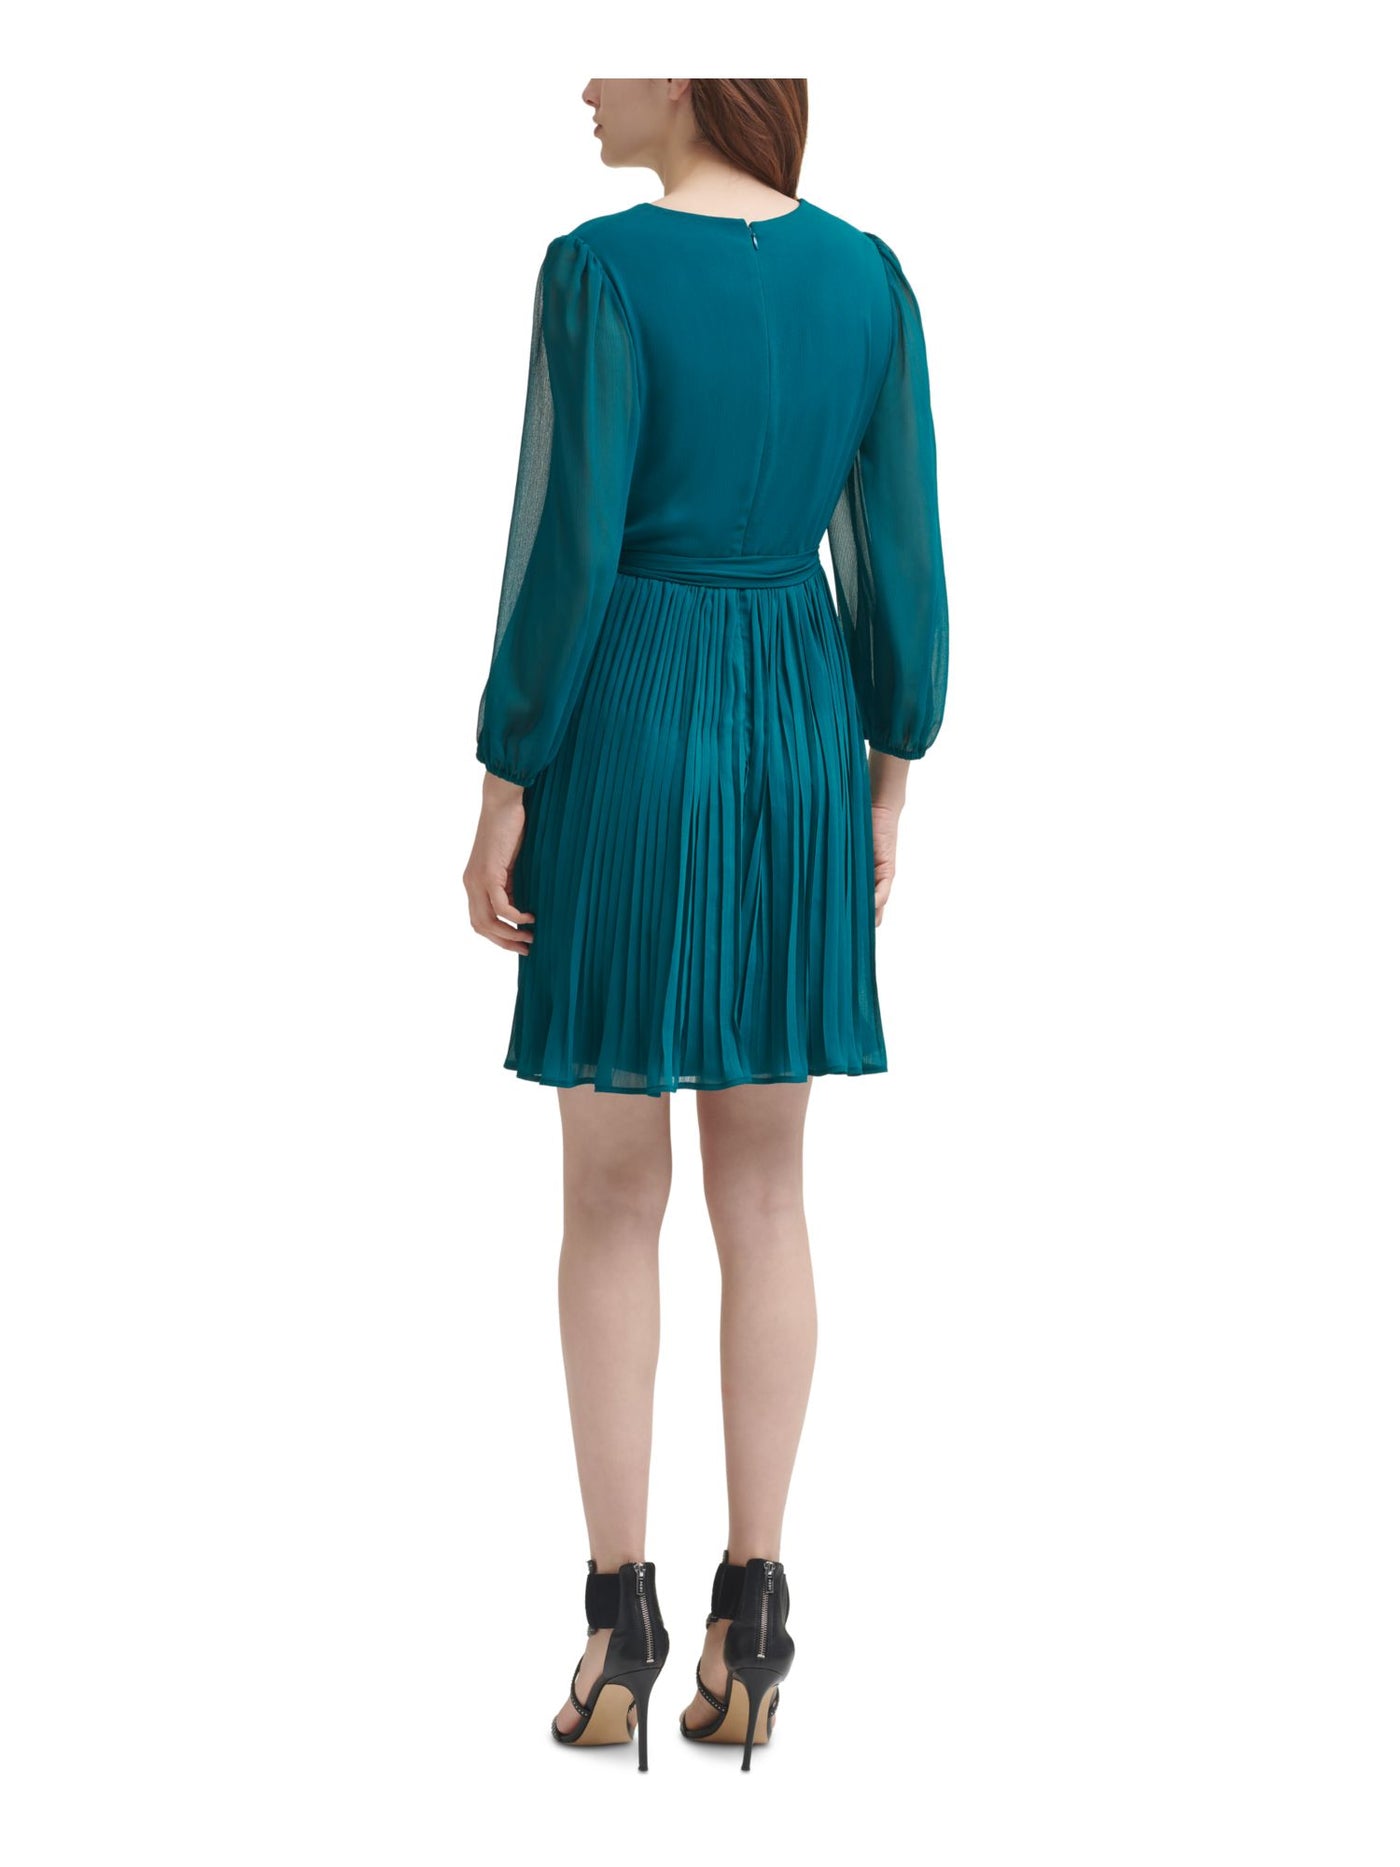 DKNY Womens Teal Tie Zippered Balloon Sleeve Surplice Neckline Above The Knee Cocktail Knife Pleated Dress 14